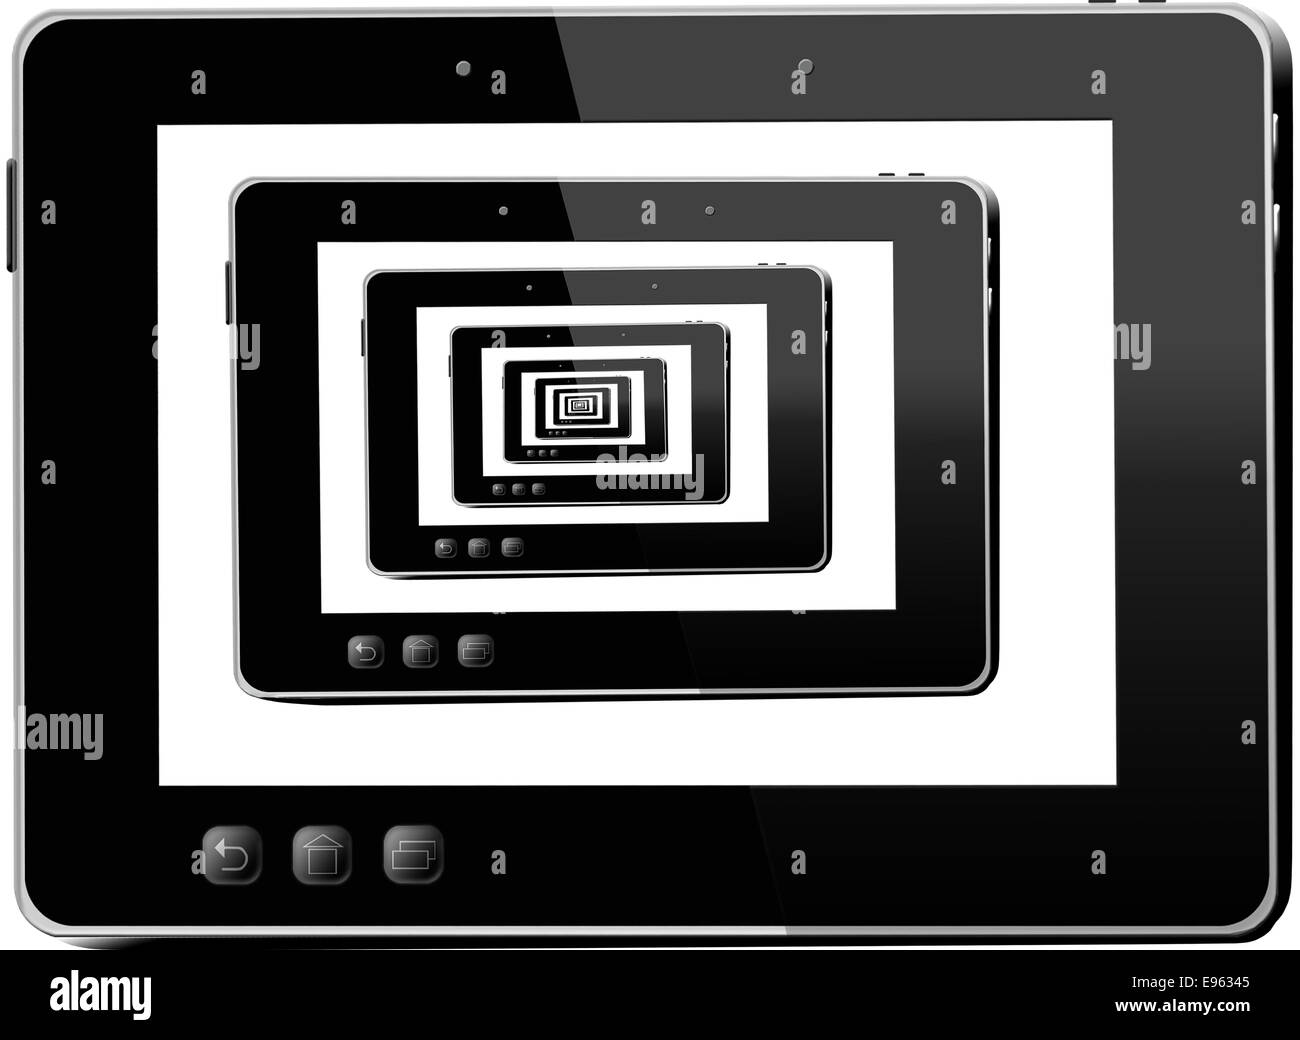 kaleidoscope from black tablets in the black tablets Stock Photo